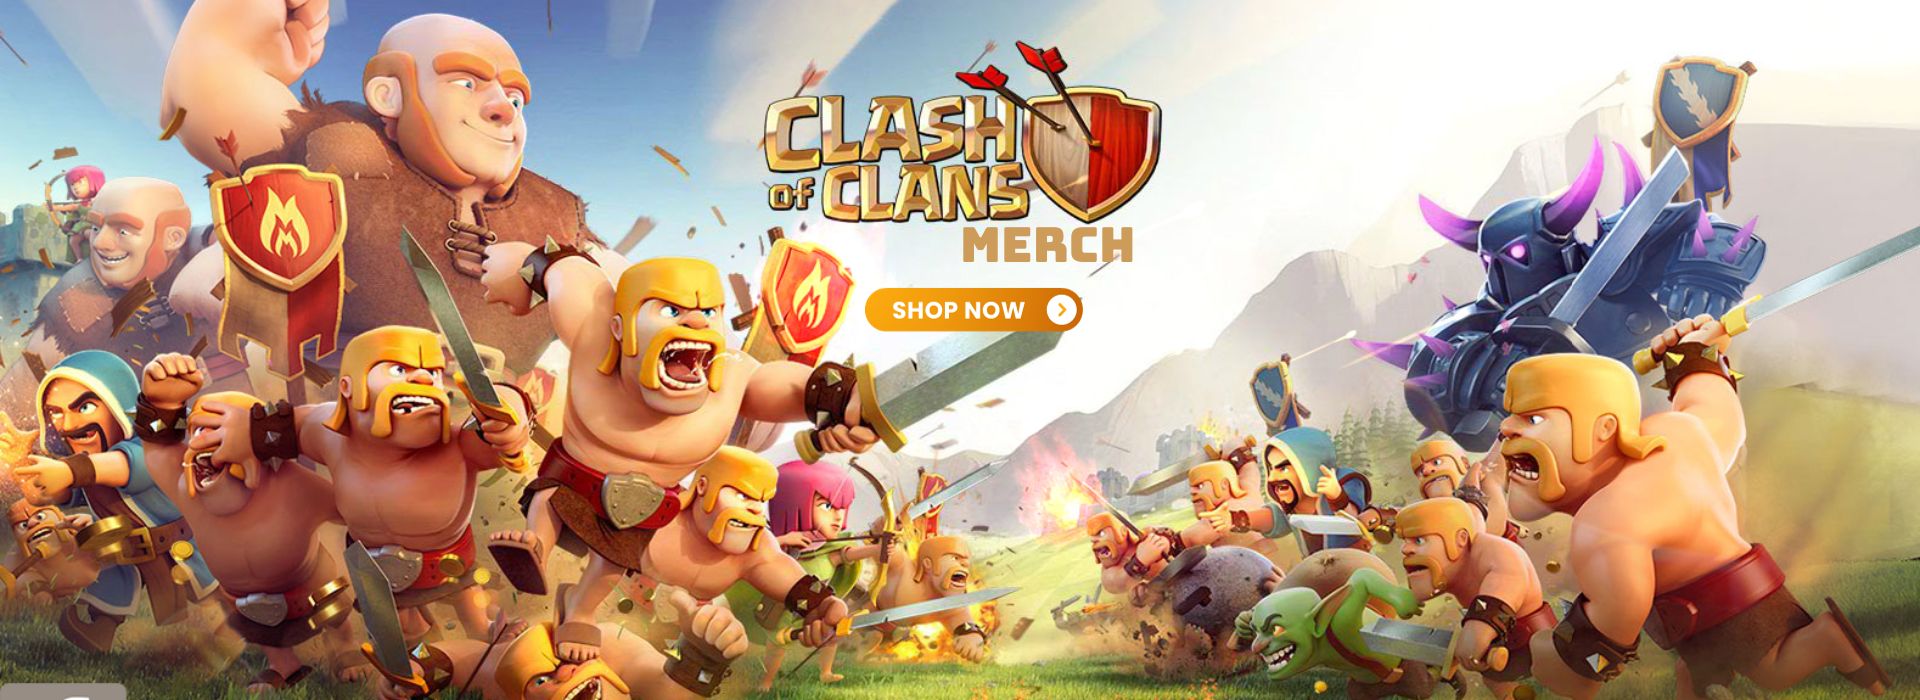 Clash of clans Banner